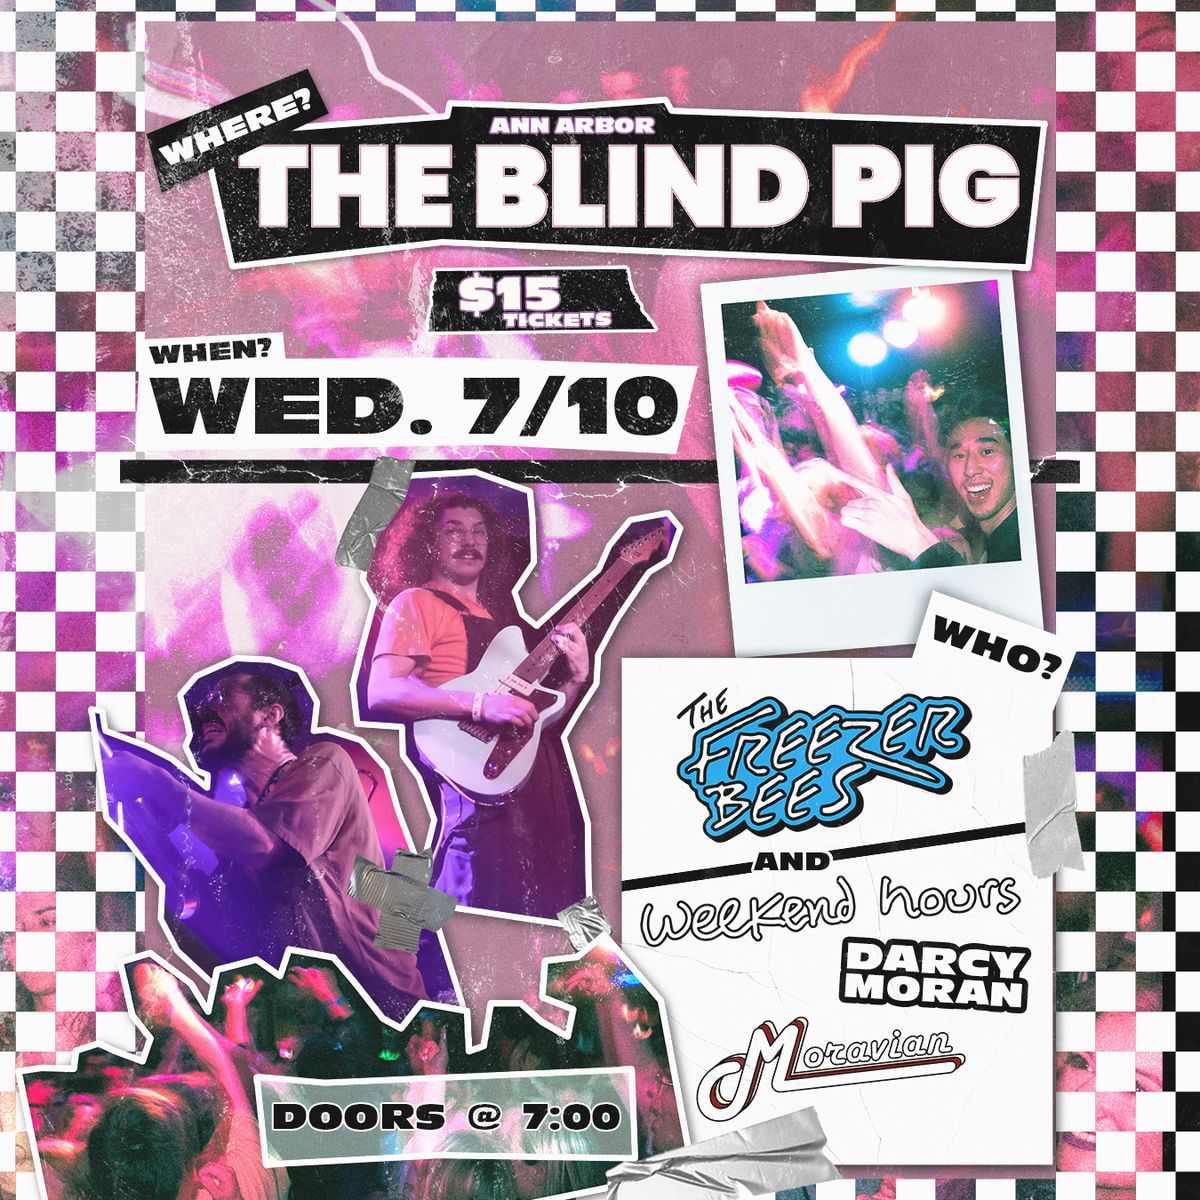 The Freezer Bees @ The Blind Pig | 